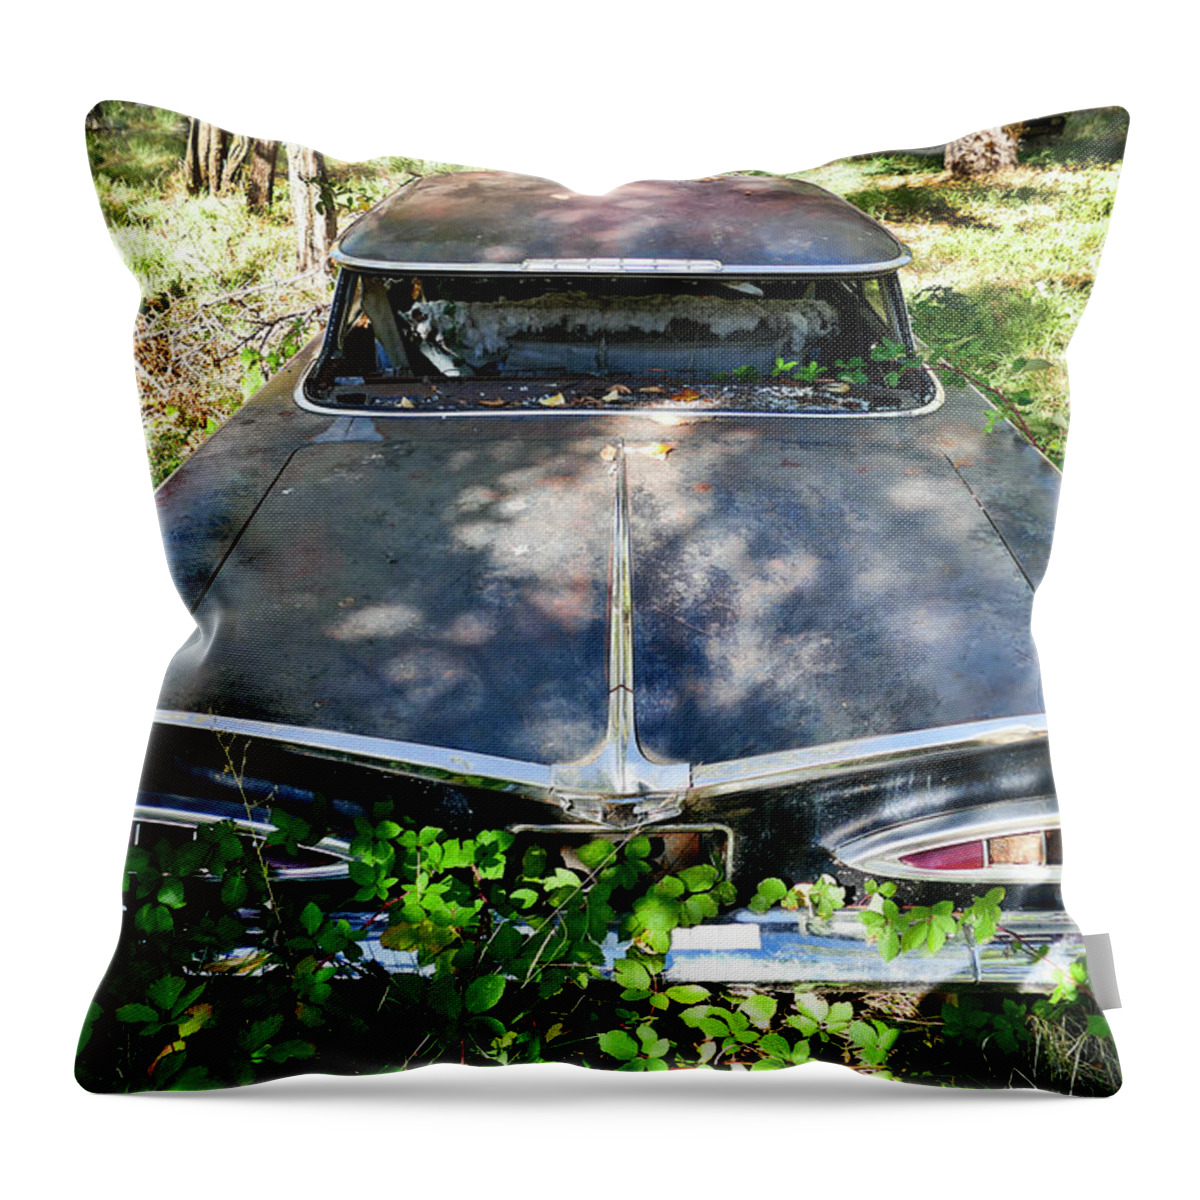 Chevy Impala Vintage Auto Throw Pillow featuring the photograph Chevy Impala by Neil Pankler